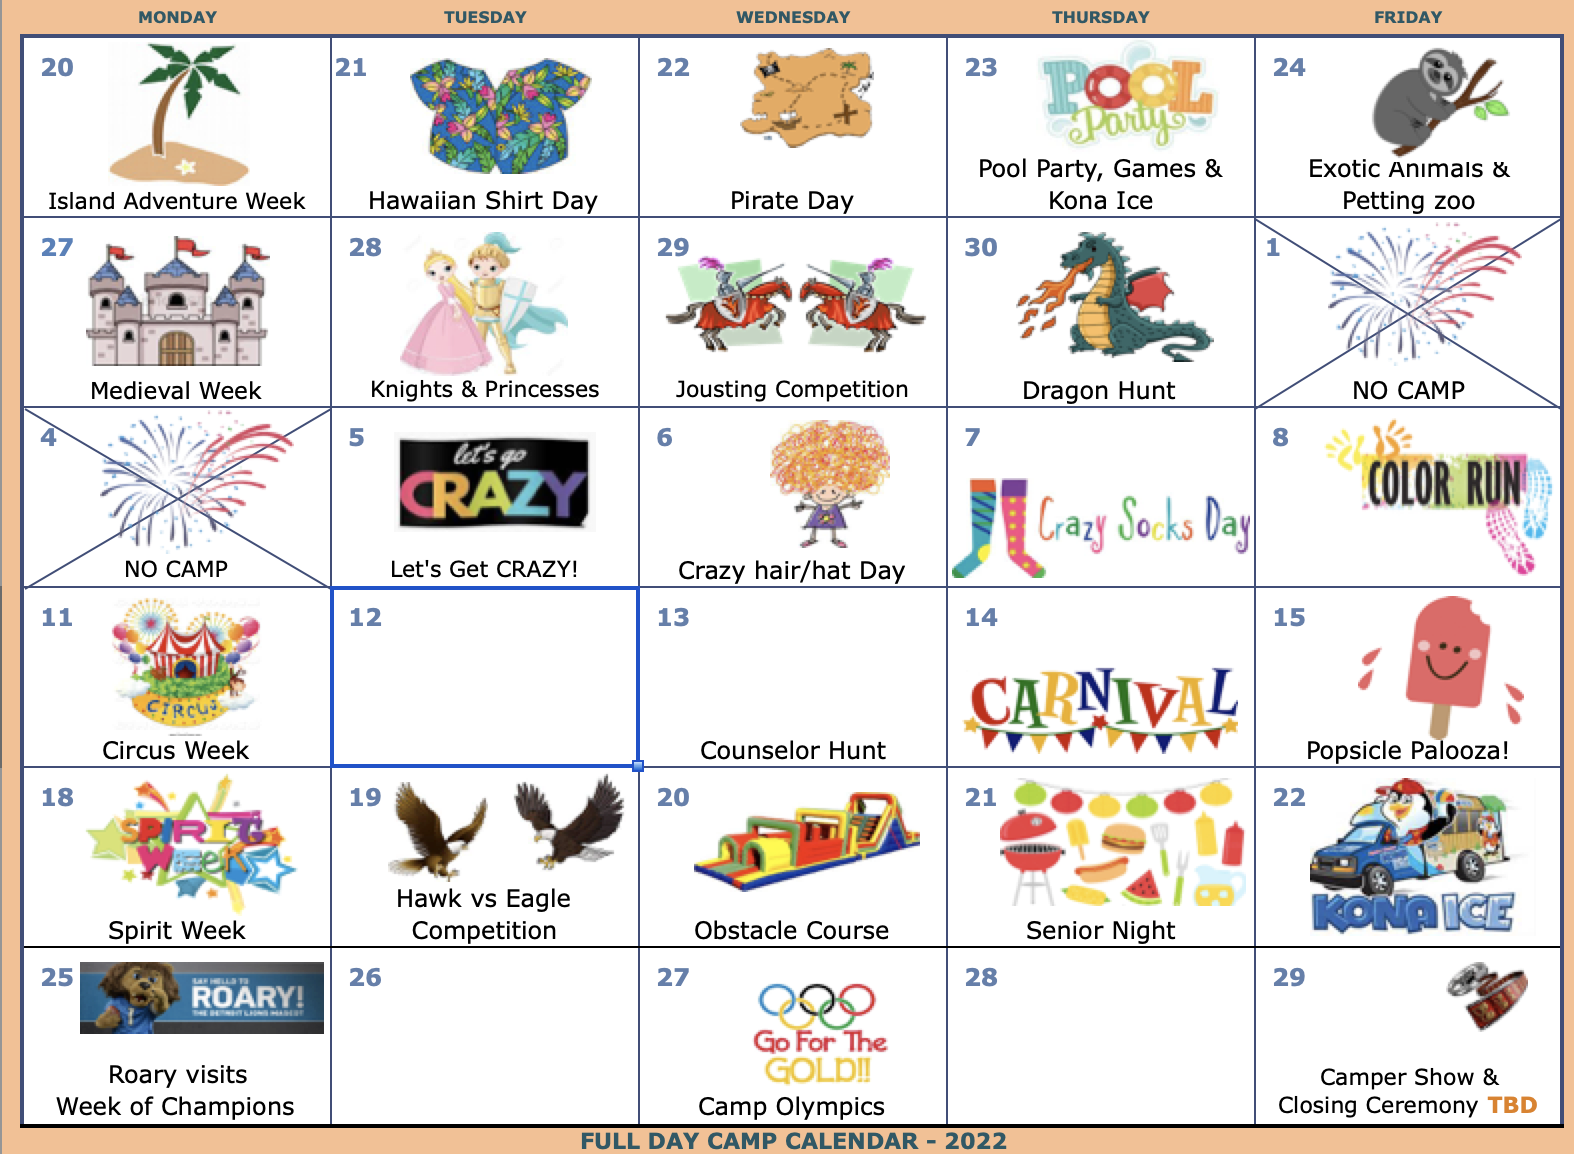 Click image to download the Day Camp Weekly Themes calendar. 